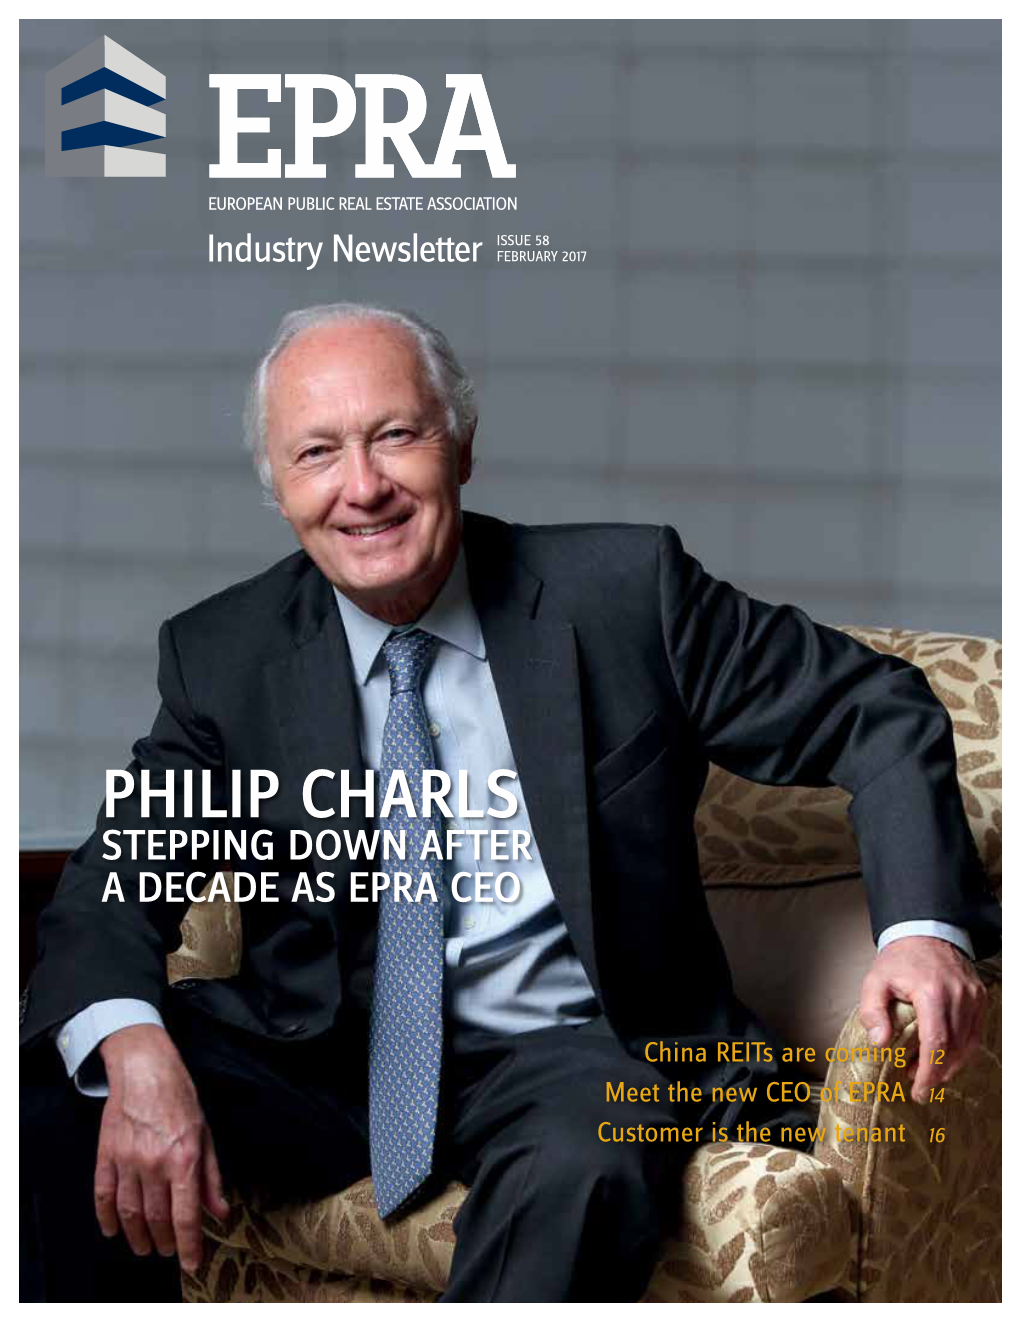 Philip Charls Stepping Down After a Decade As Epra Ceo